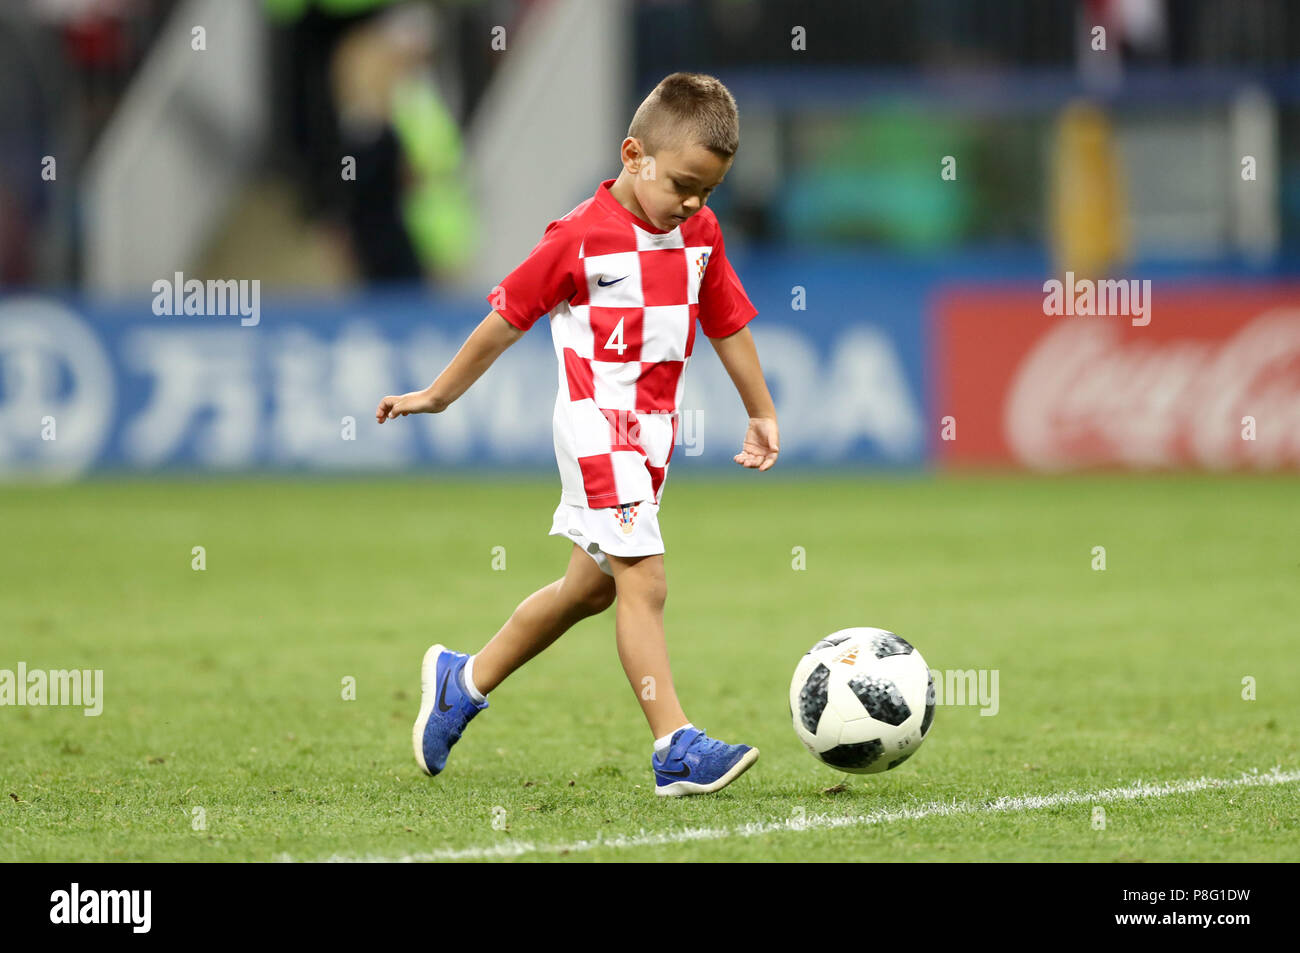 A young croatia fan wearing the shirt of Croatia's Ivan Perisic on the pitch after the final whistle of the FIFA World Cup, Semi Final match at the Luzhniki Stadium, Moscow. PRESS ASSOCIATION Photo. Picture date: Wednesday July 11, 2018. See PA story WORLDCUP Croatia. Photo credit should read: Tim Goode/PA Wire. RESTRICTIONS: Editorial use only. No commercial use. No use with any unofficial 3rd party logos. No manipulation of images. No video emulation. Stock Photo